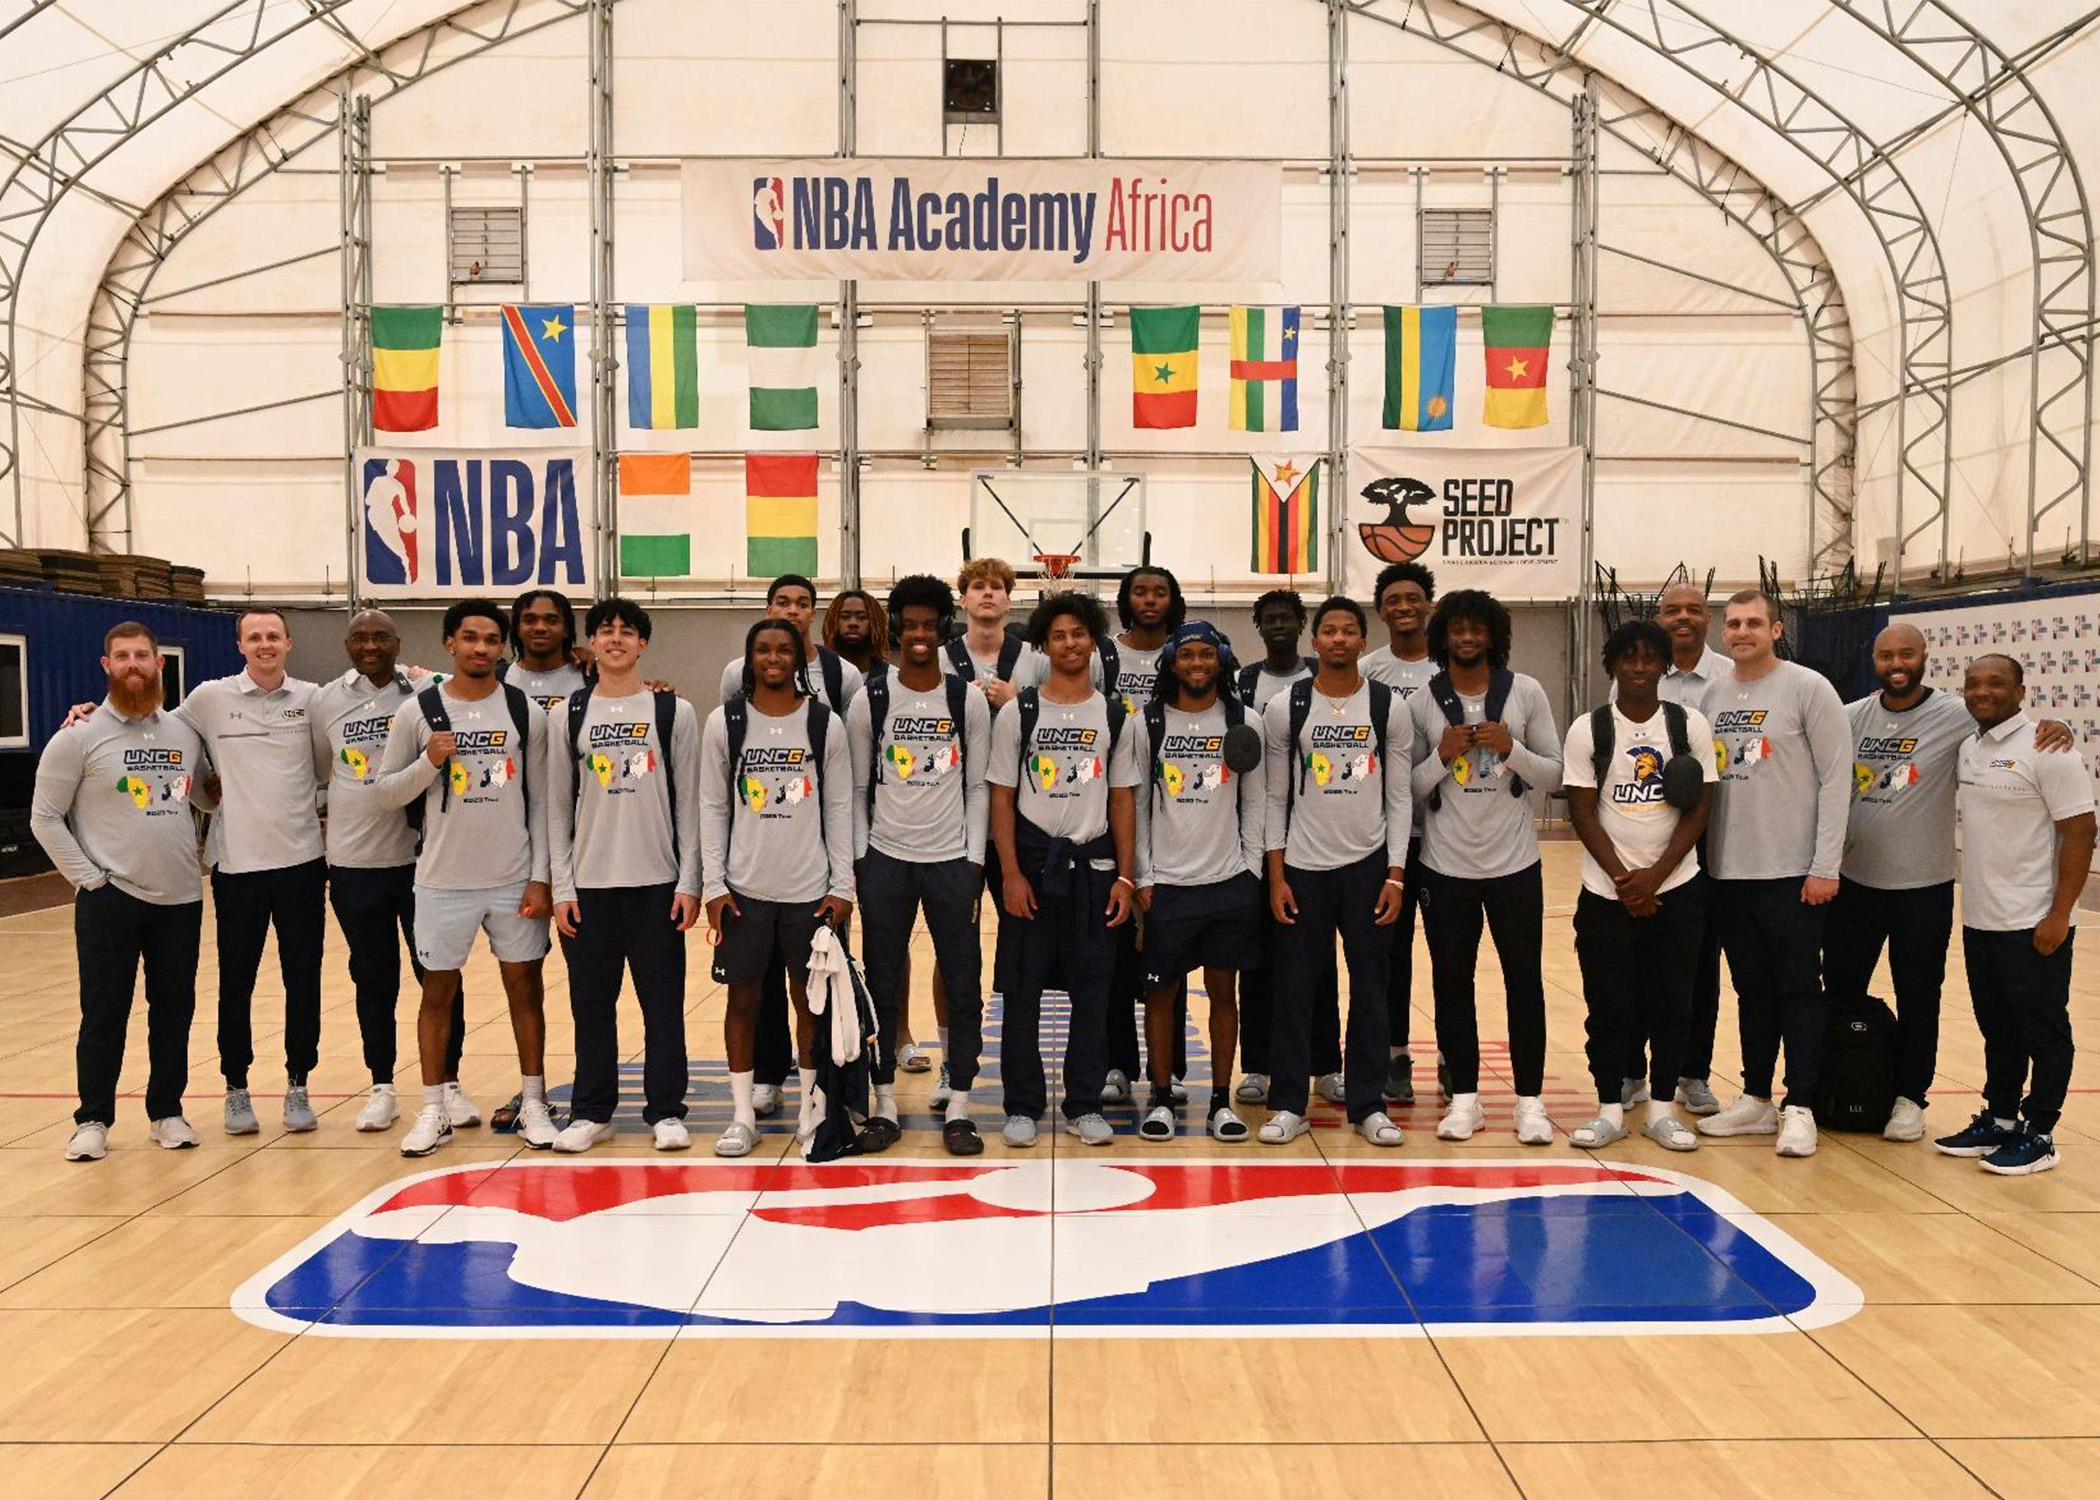 UNCG Men's Basketball team poses together in an arena with international flags and NBA Academy Africa sign behind them. 